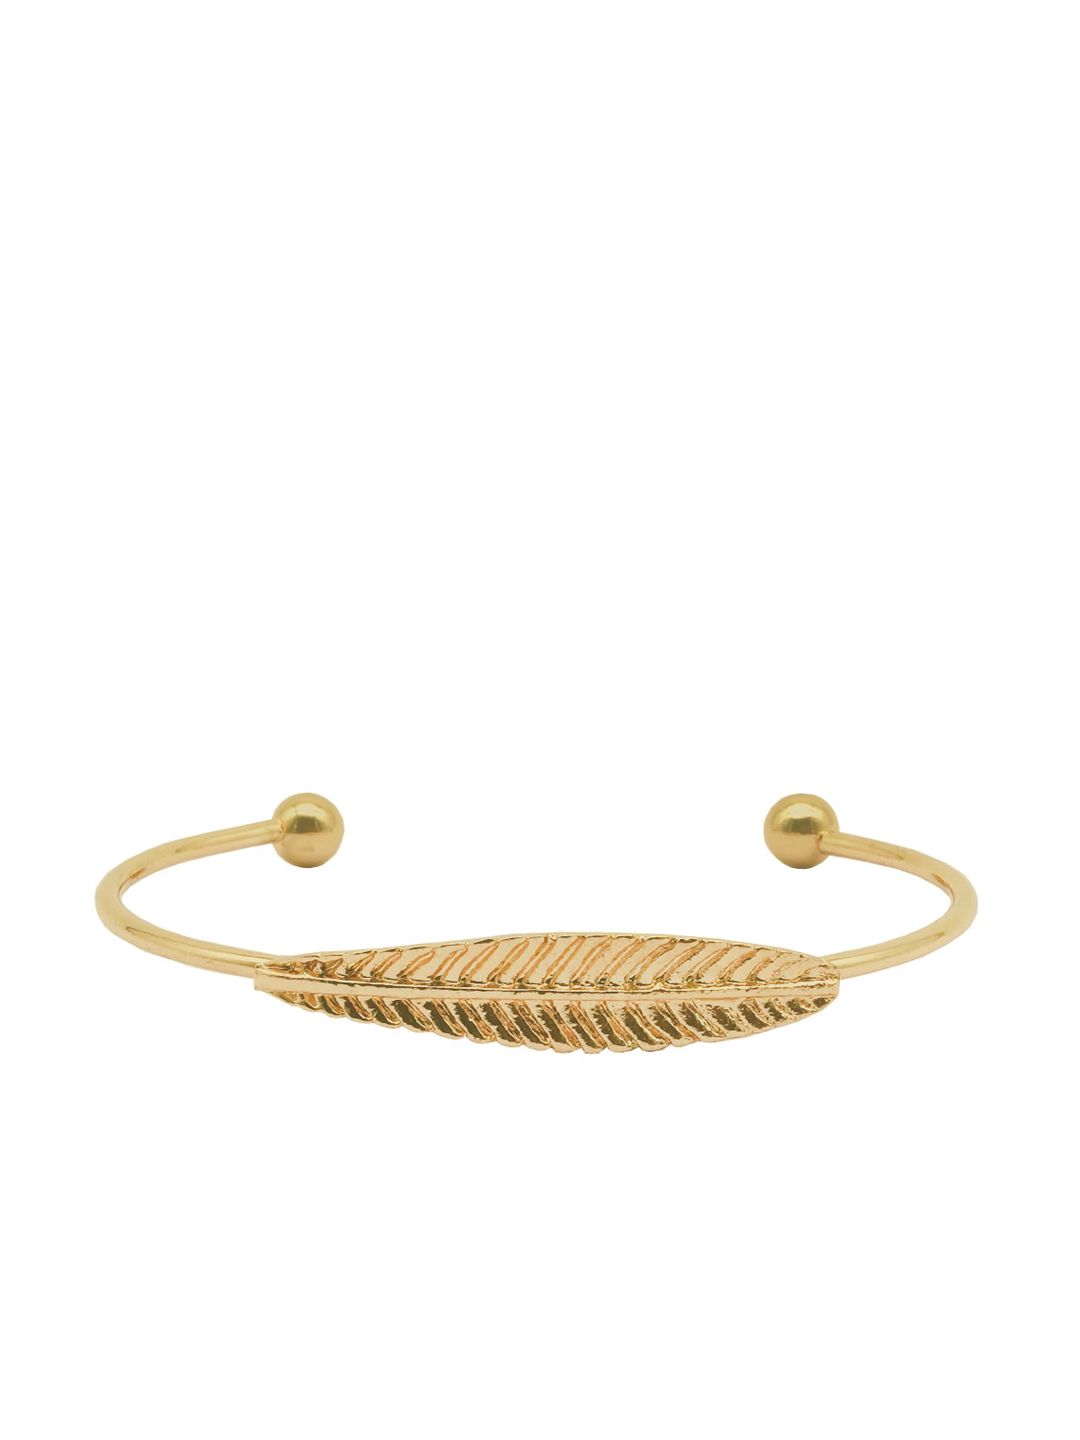 JOKER & WITCH Women Gold Plated Single Leaf Cuff Bracelet Price in India